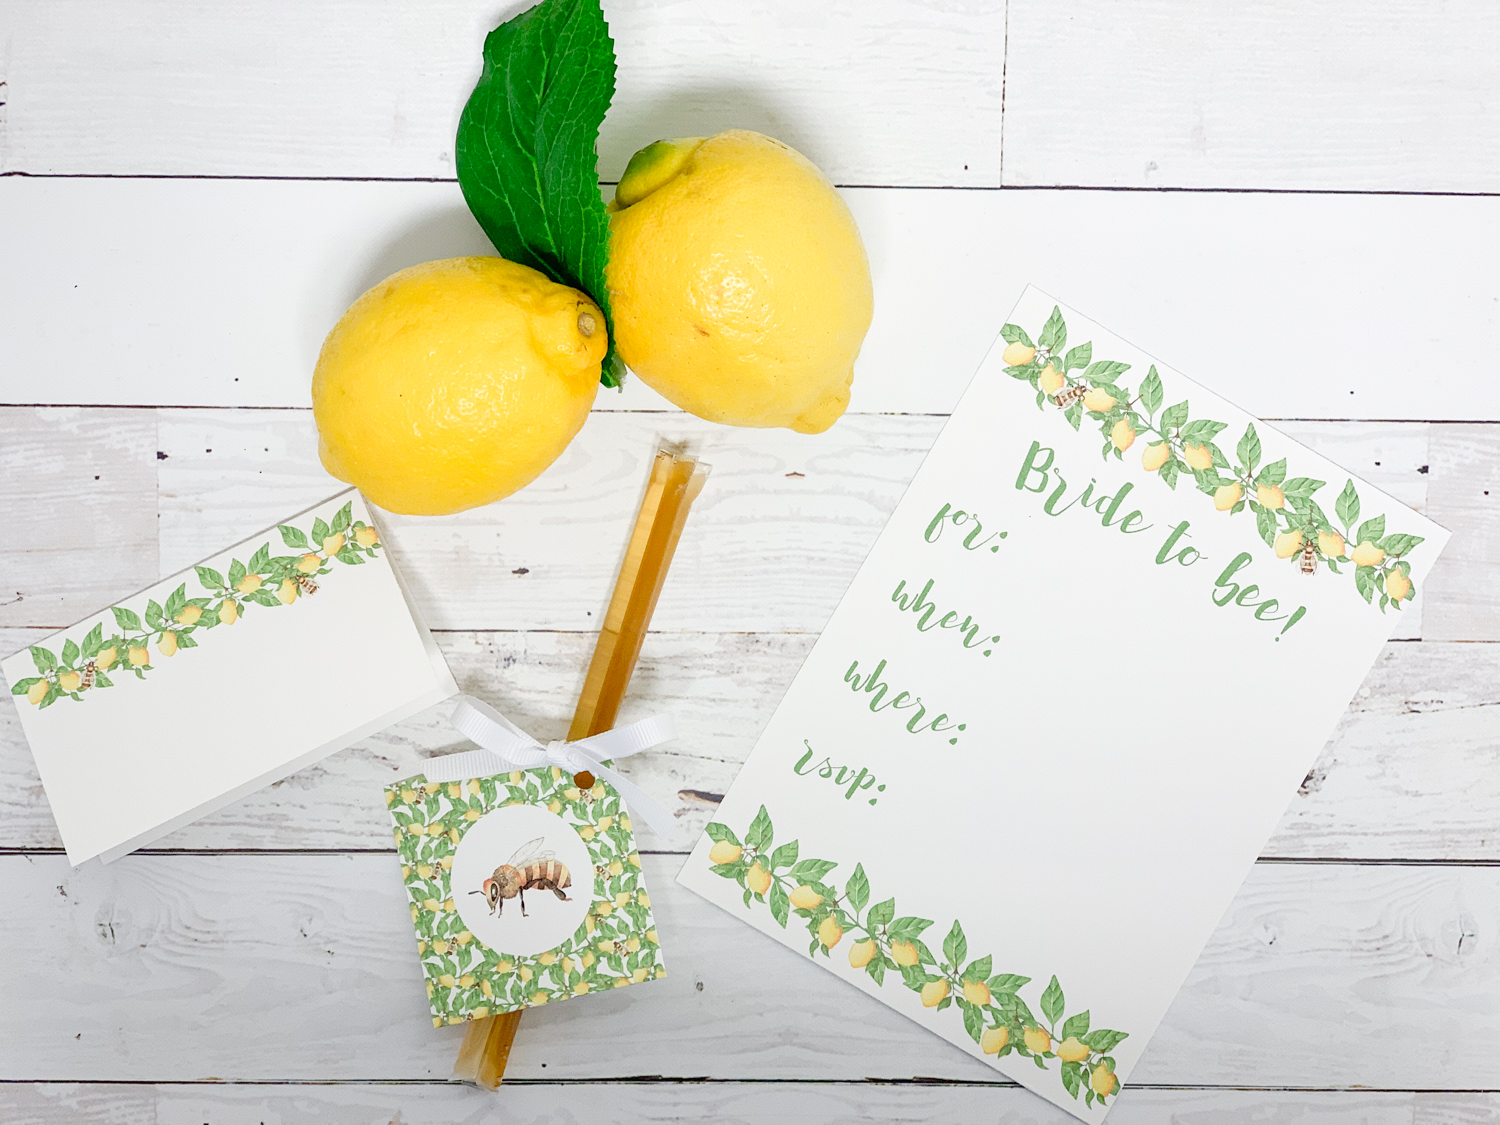 Bride to Bee Bridal Shower Party Printables